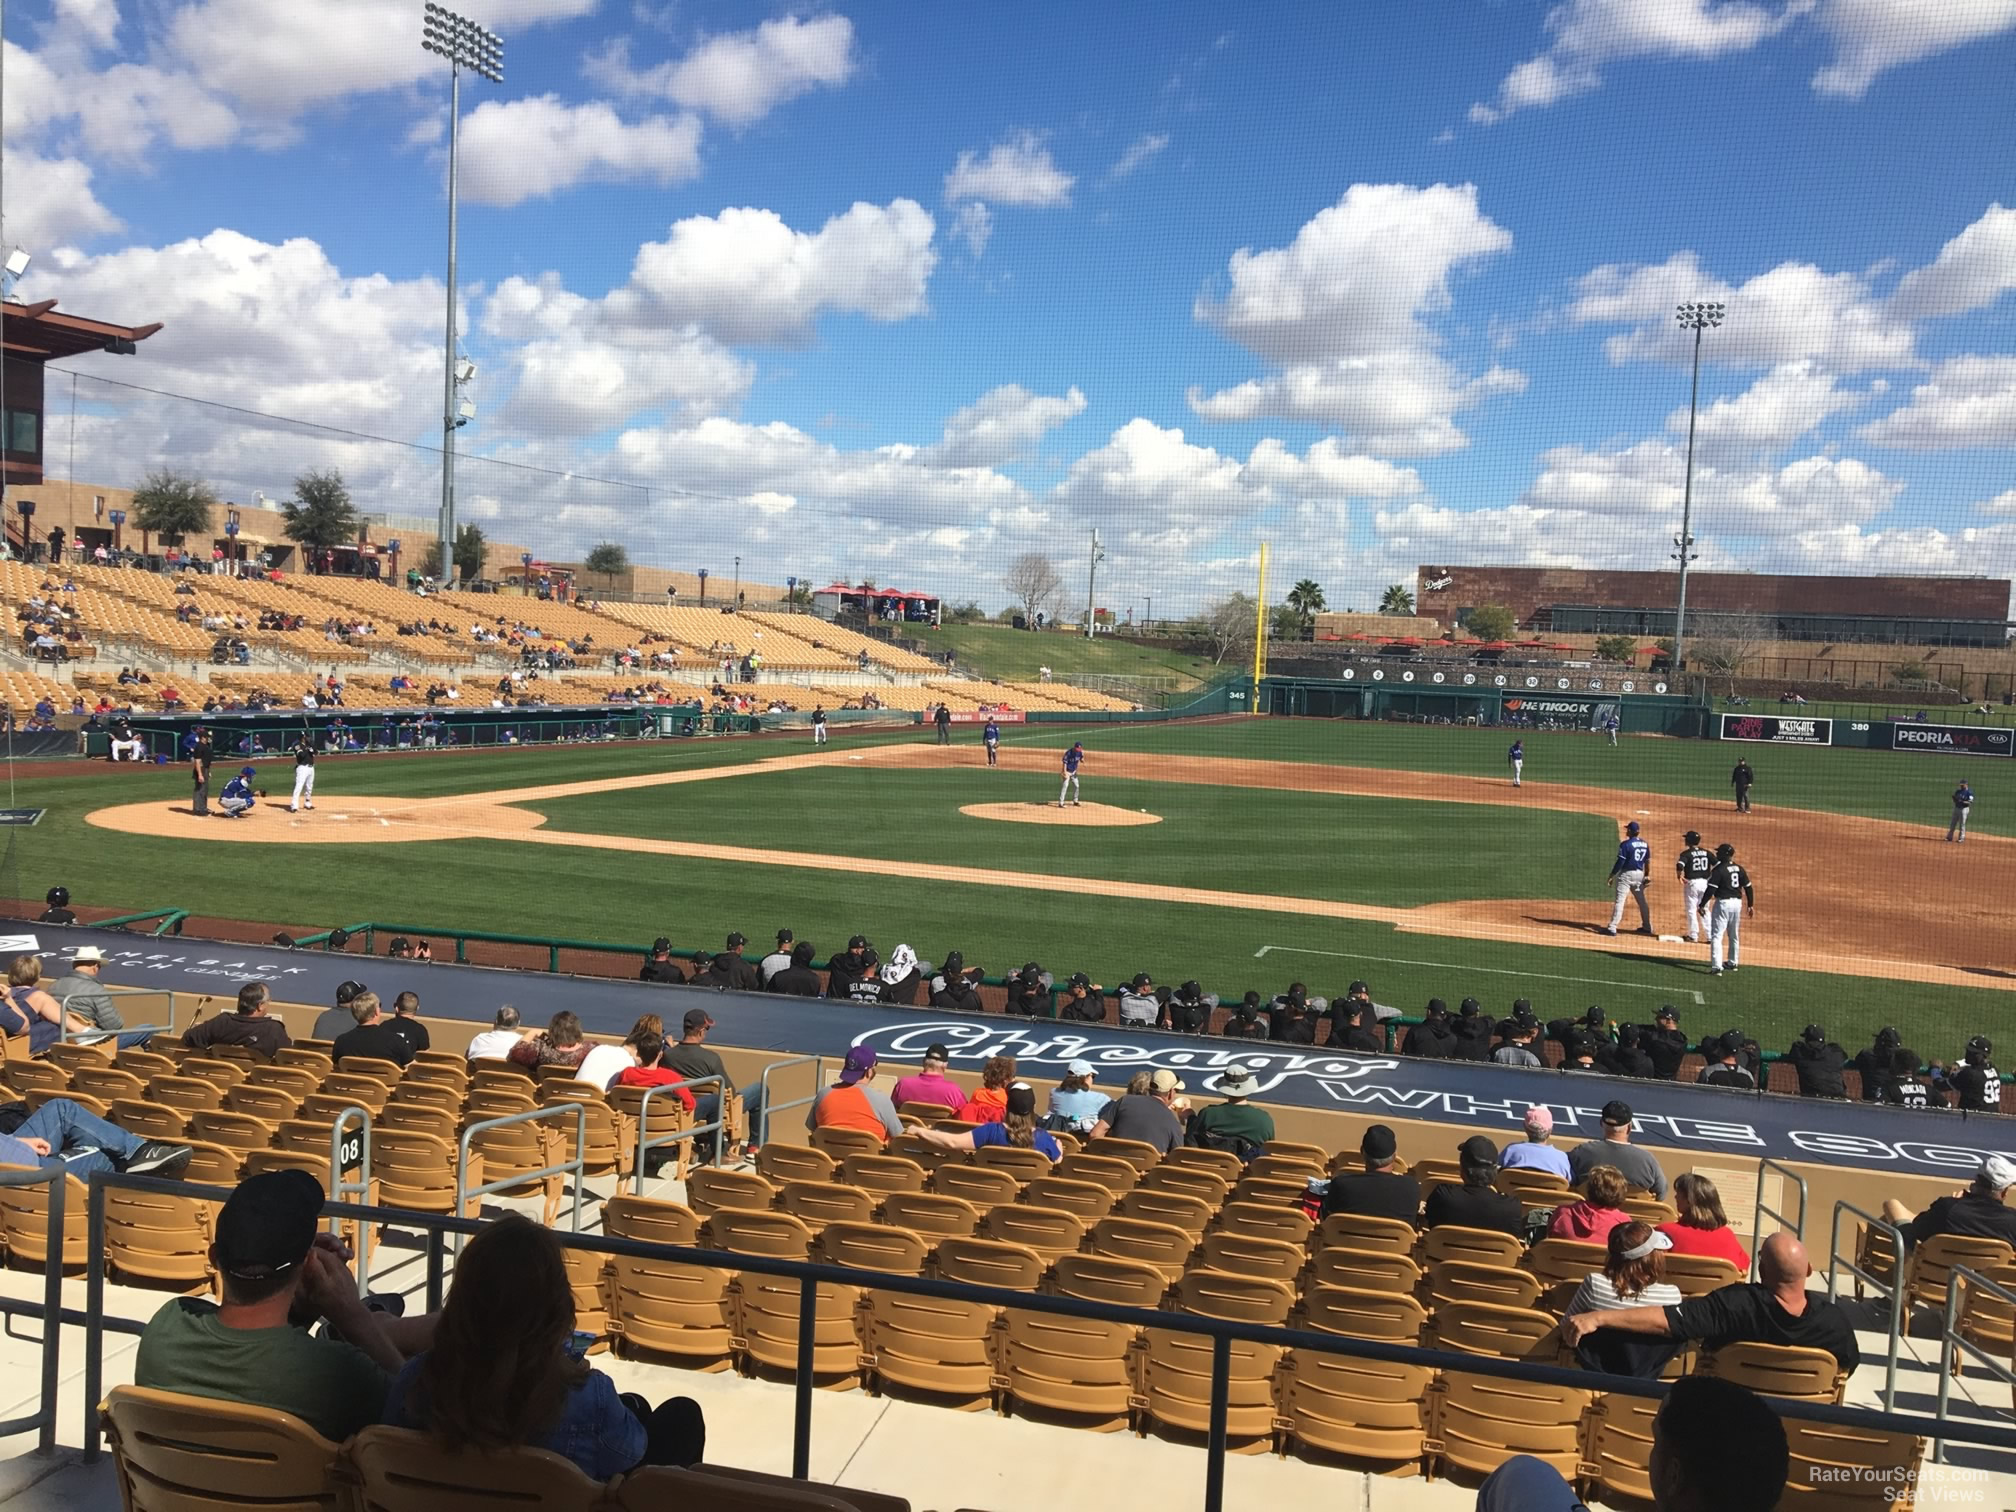 section 108, row 5 seat view  - camelback ranch